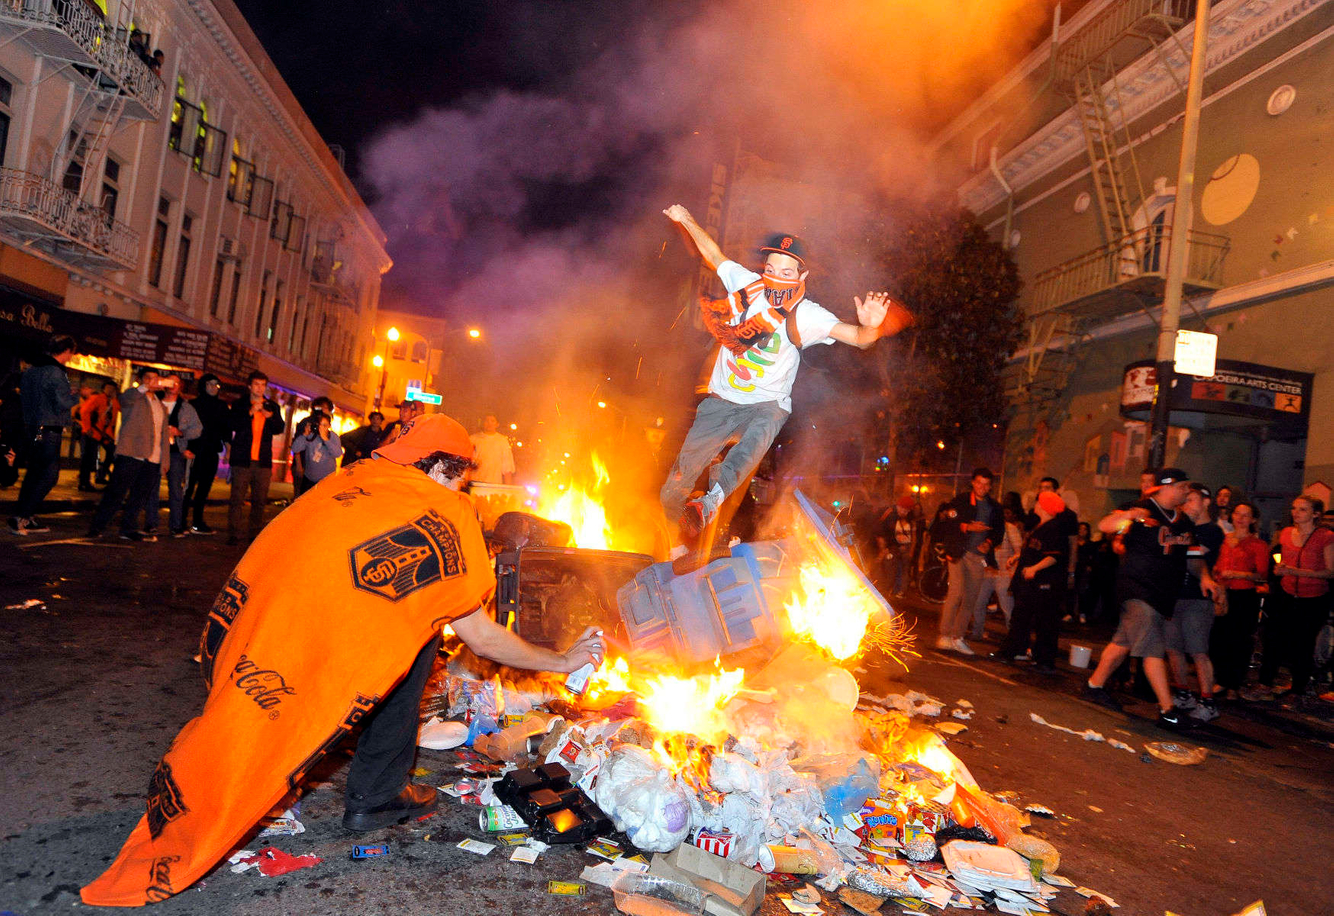 WORLD SERIES REACTIONS: A man jumps over burning trash while vandalism ensues after the Giants beat the Royals in the 2014 World Series in San Francisco.